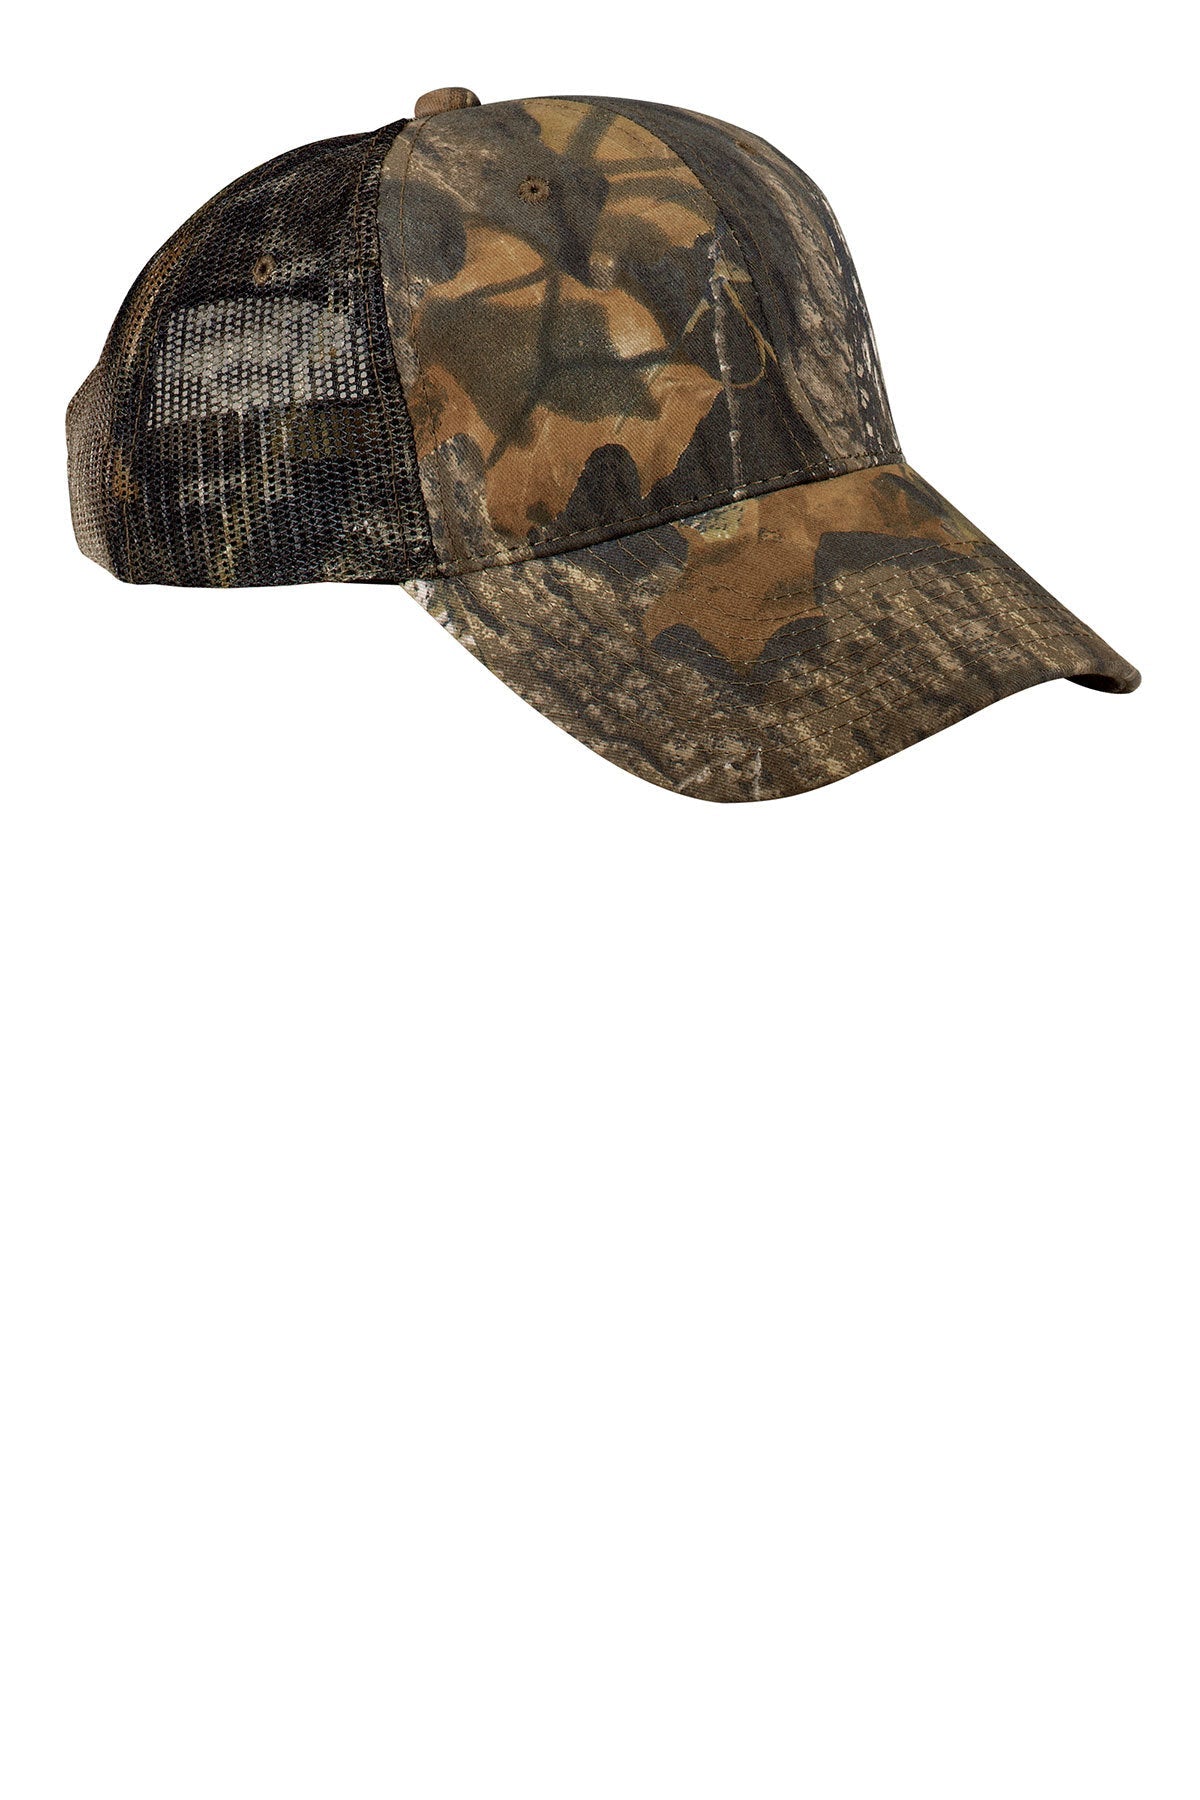 Port Authority Pro Camouflage Custom Series Caps with Mesh Back, Mossy Oak New Break-Up